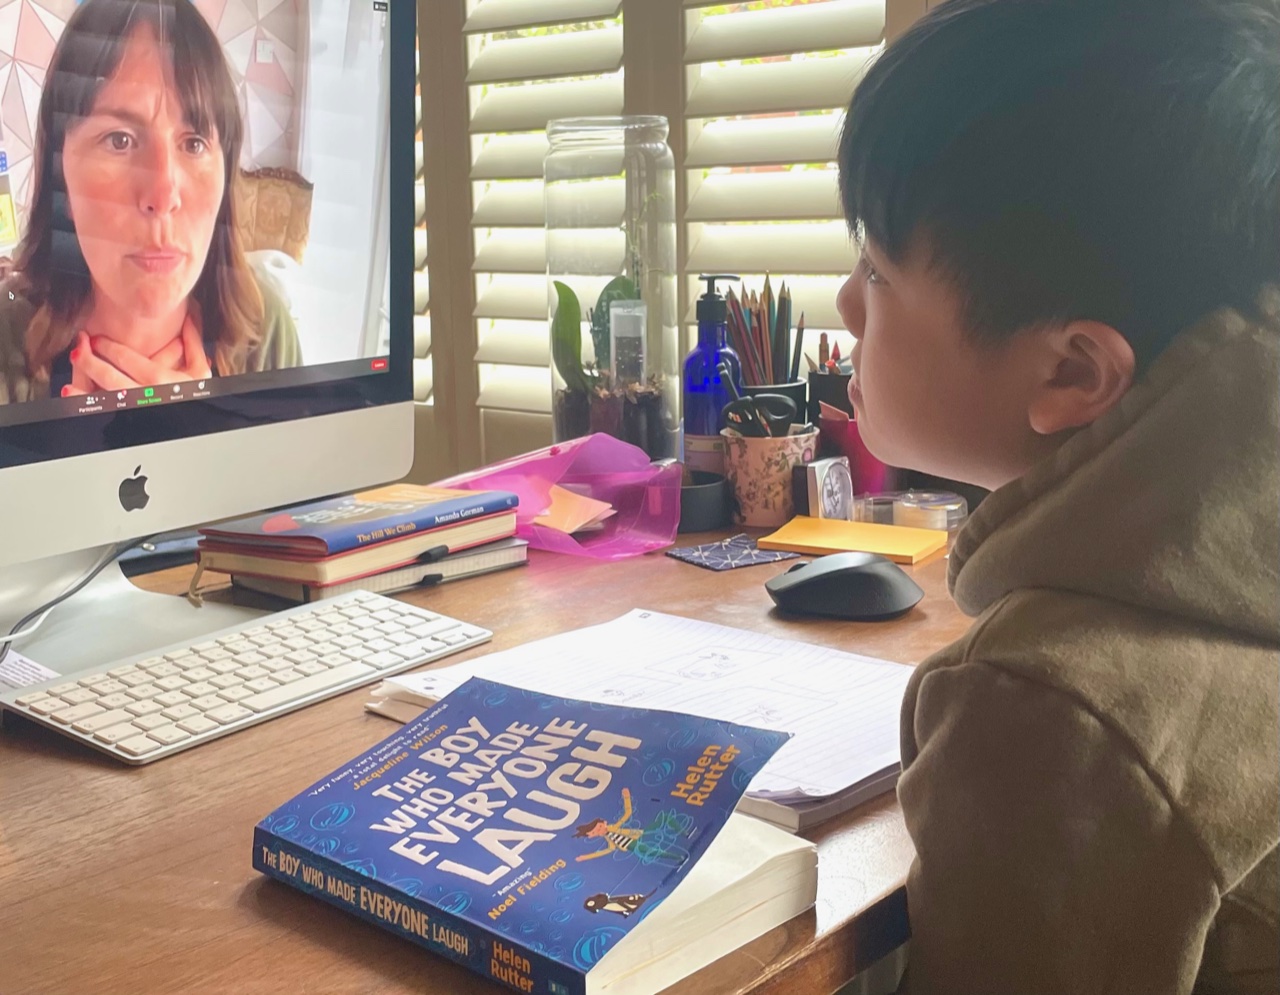 A child takes part in an online writing workshop with author, Helen Rutter. On his desk is Helen's book 'The Boy Who Made Everyone Laugh'.